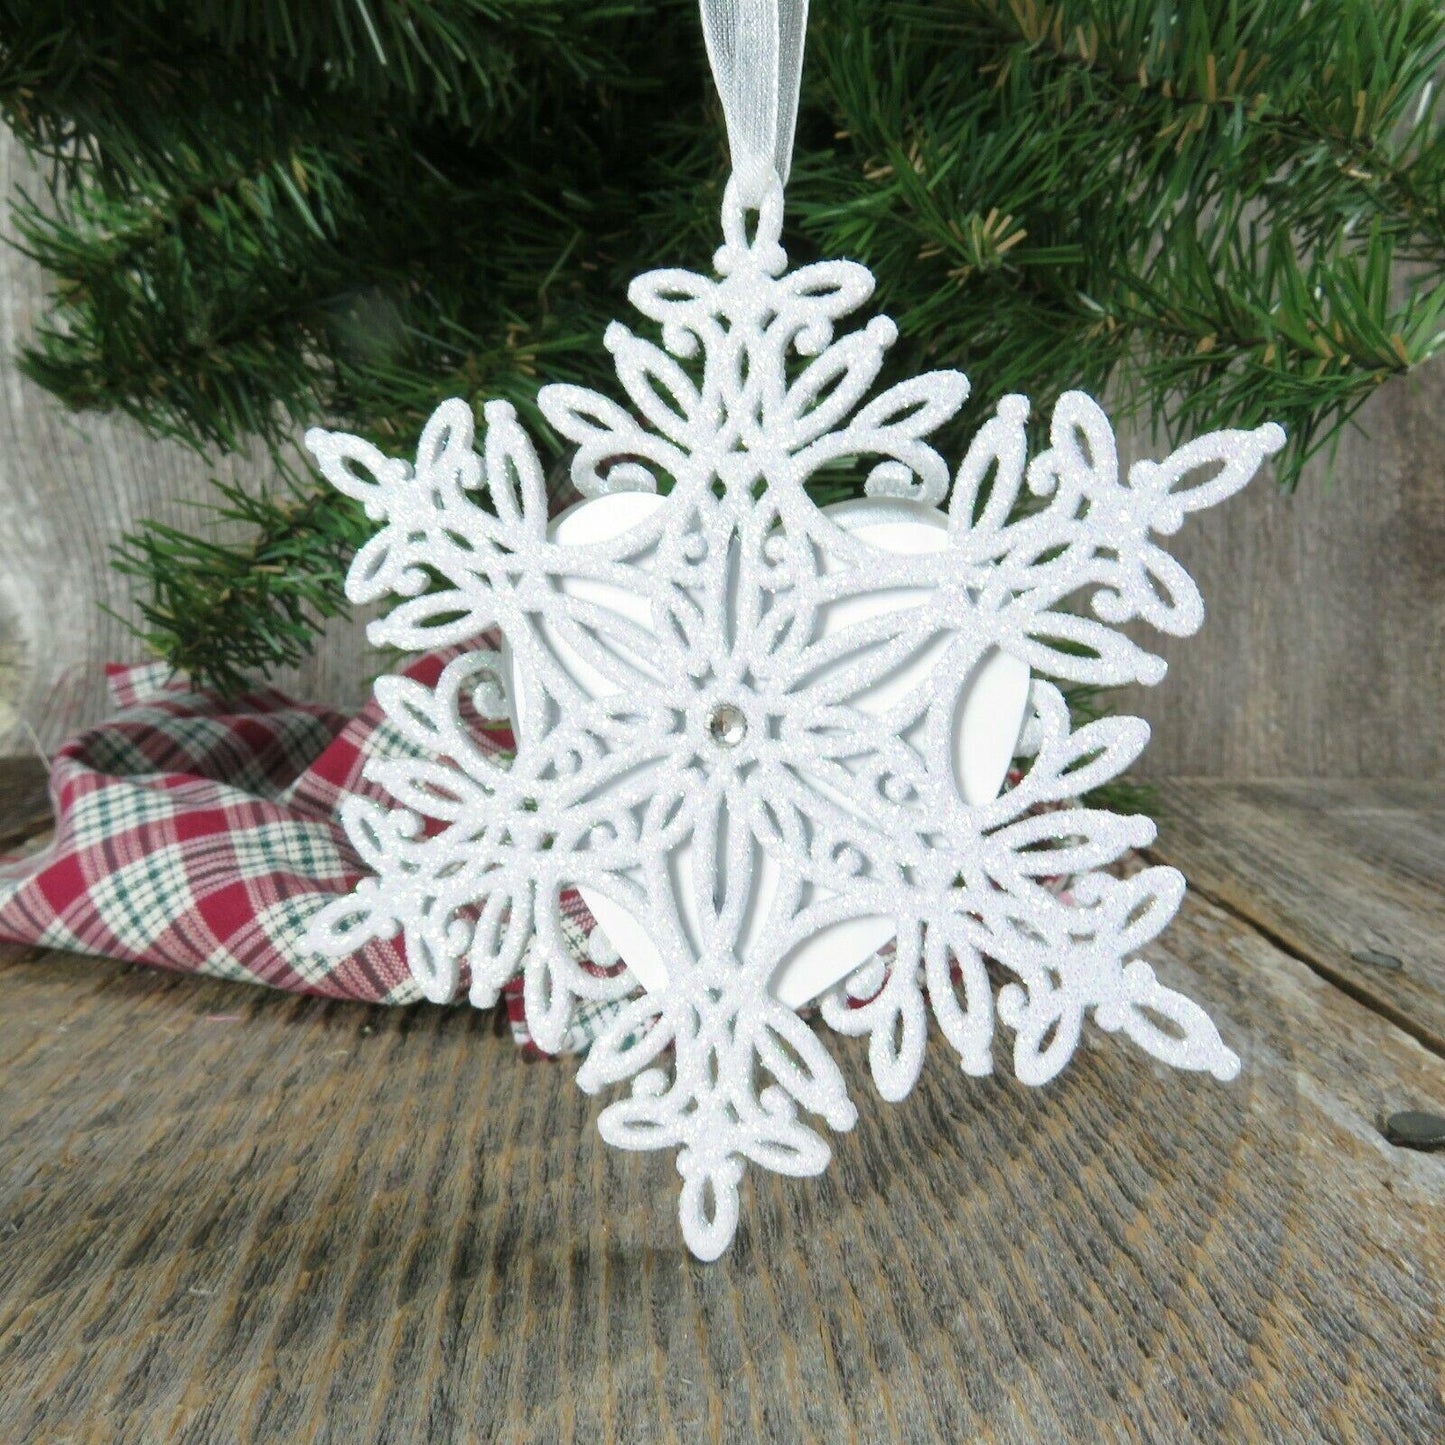 Heart Snowflake Ornament Hallmark Our Christmas Together 2015 Married Couple